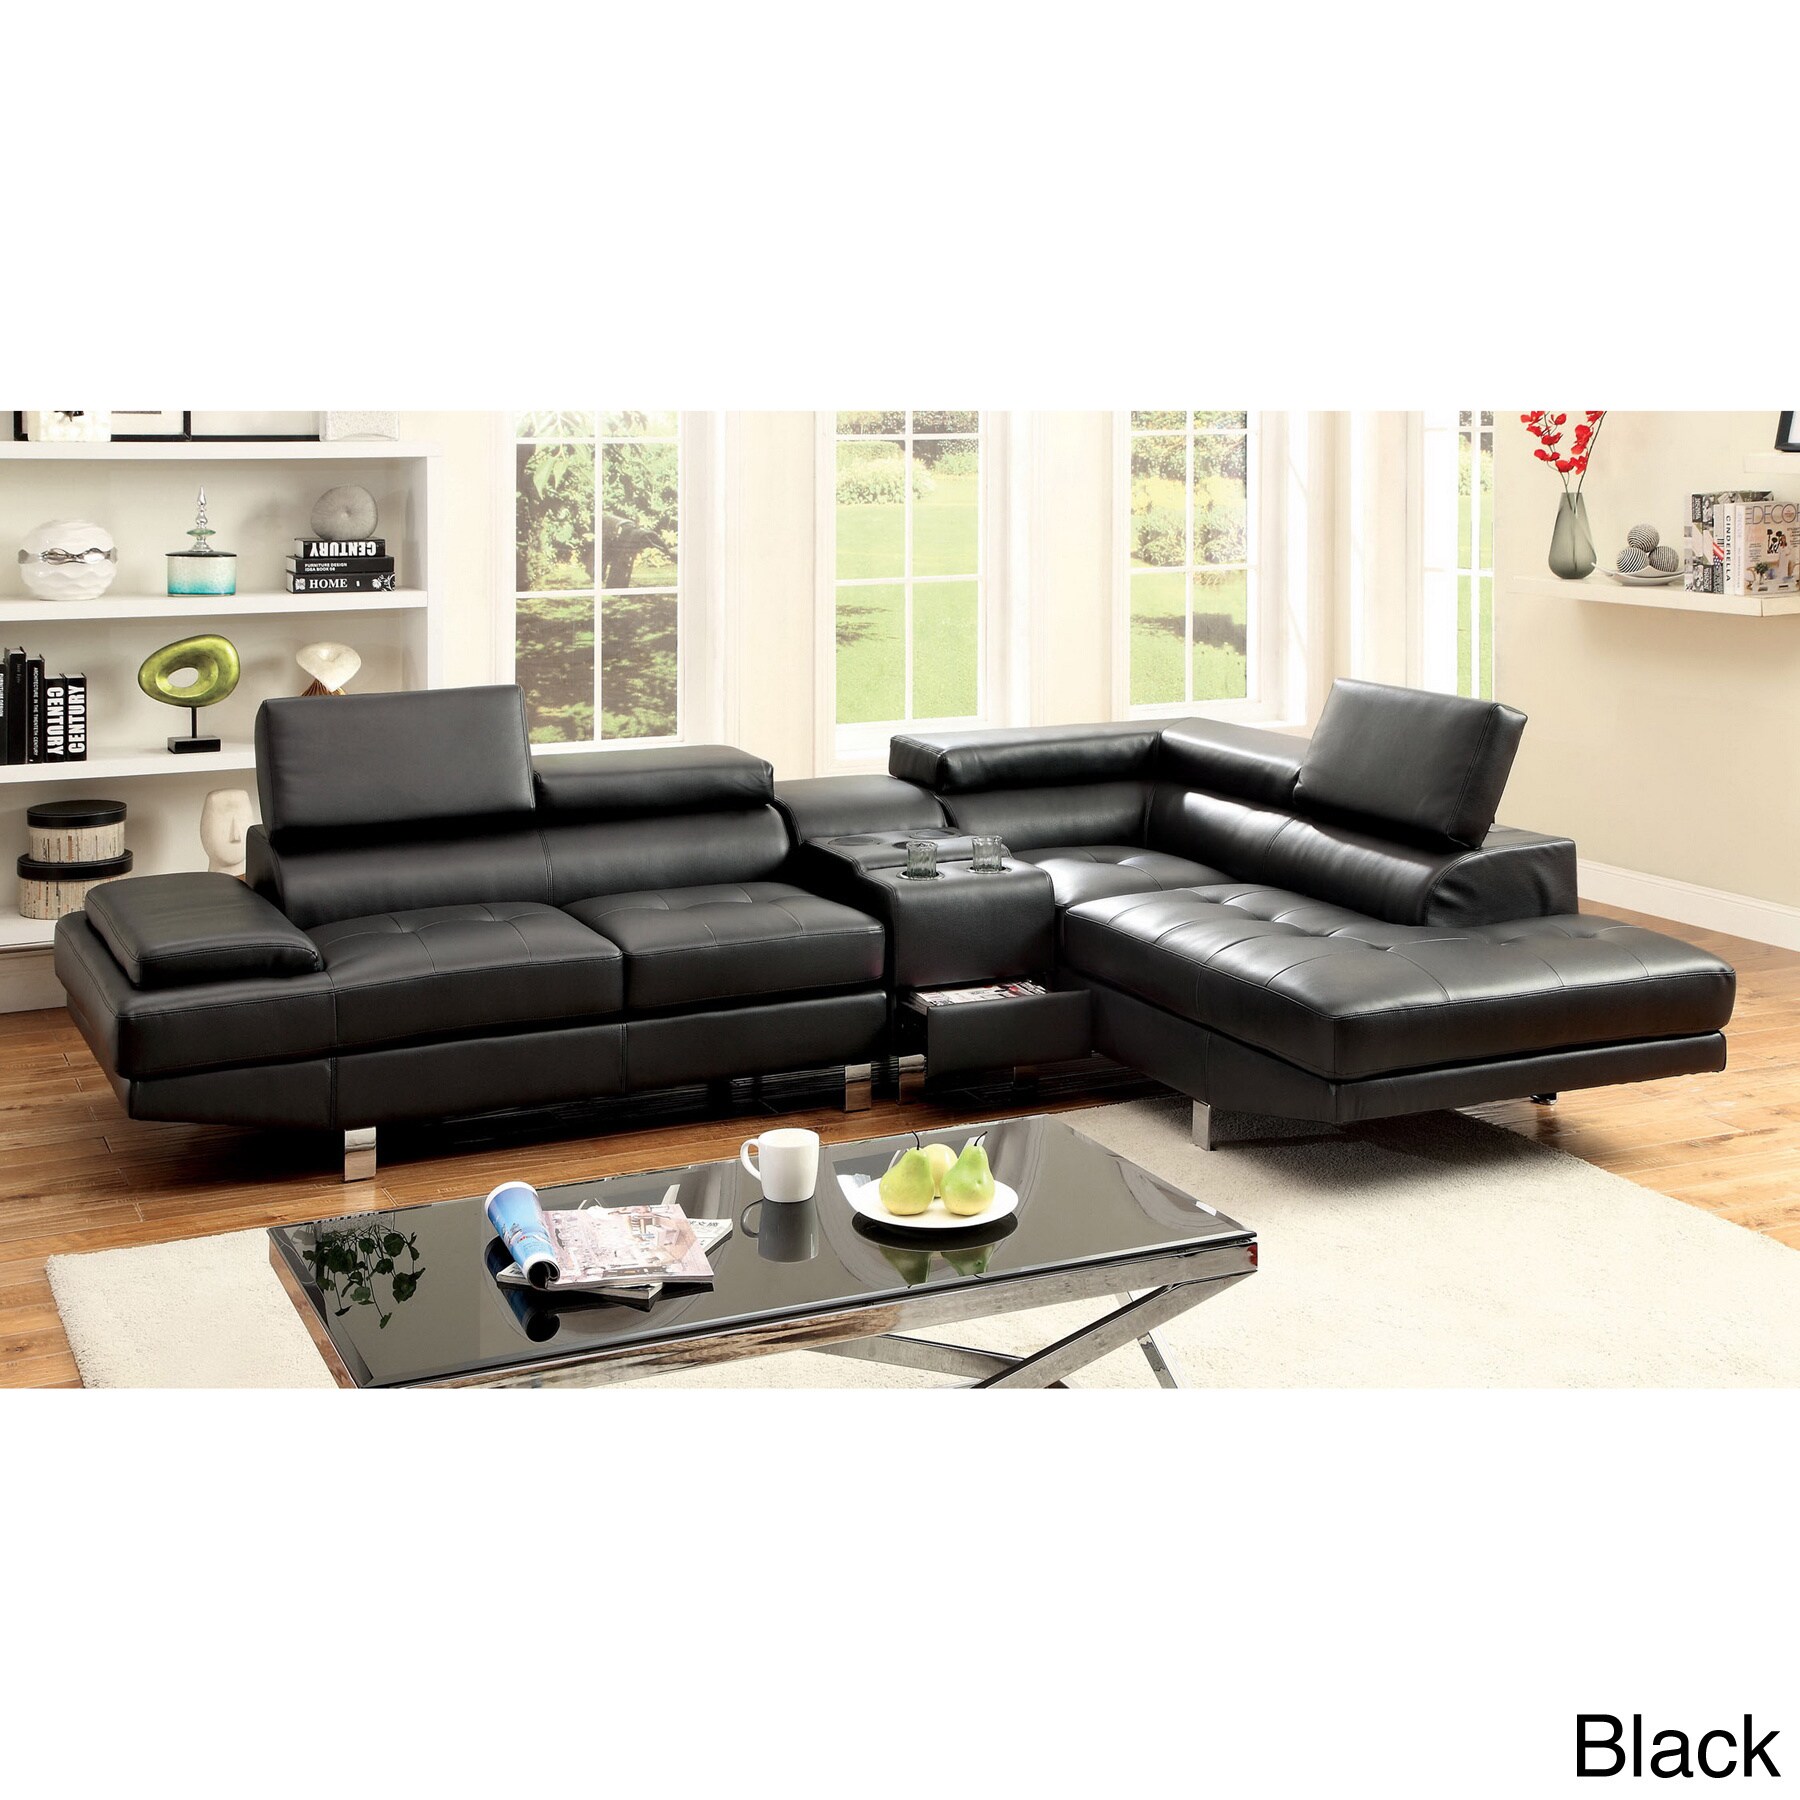 Furniture Of America Kemzy 2 piece Bonded Leather Sectional Bluetooth Speaker Console Set